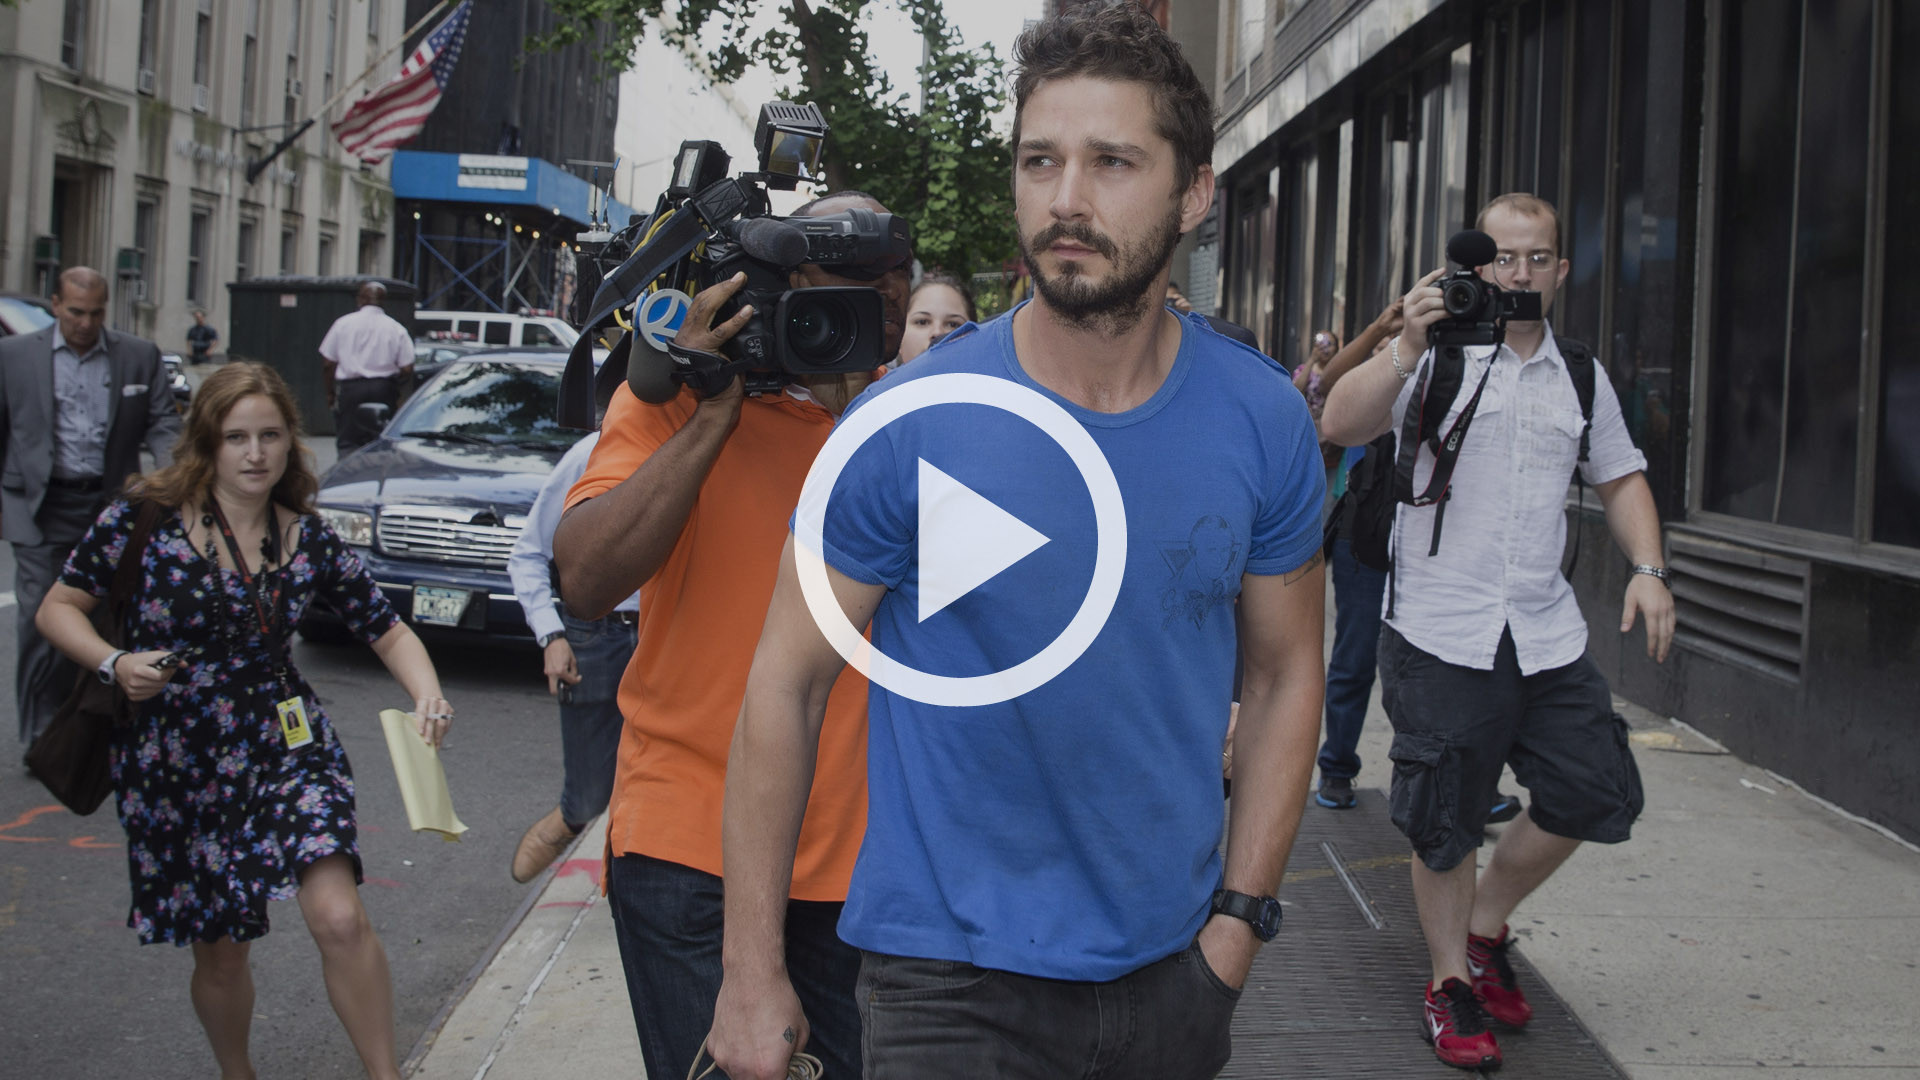 Shia LaBeouf arrested in disorderly conduct at Broadway show - LA Times1920 x 1080